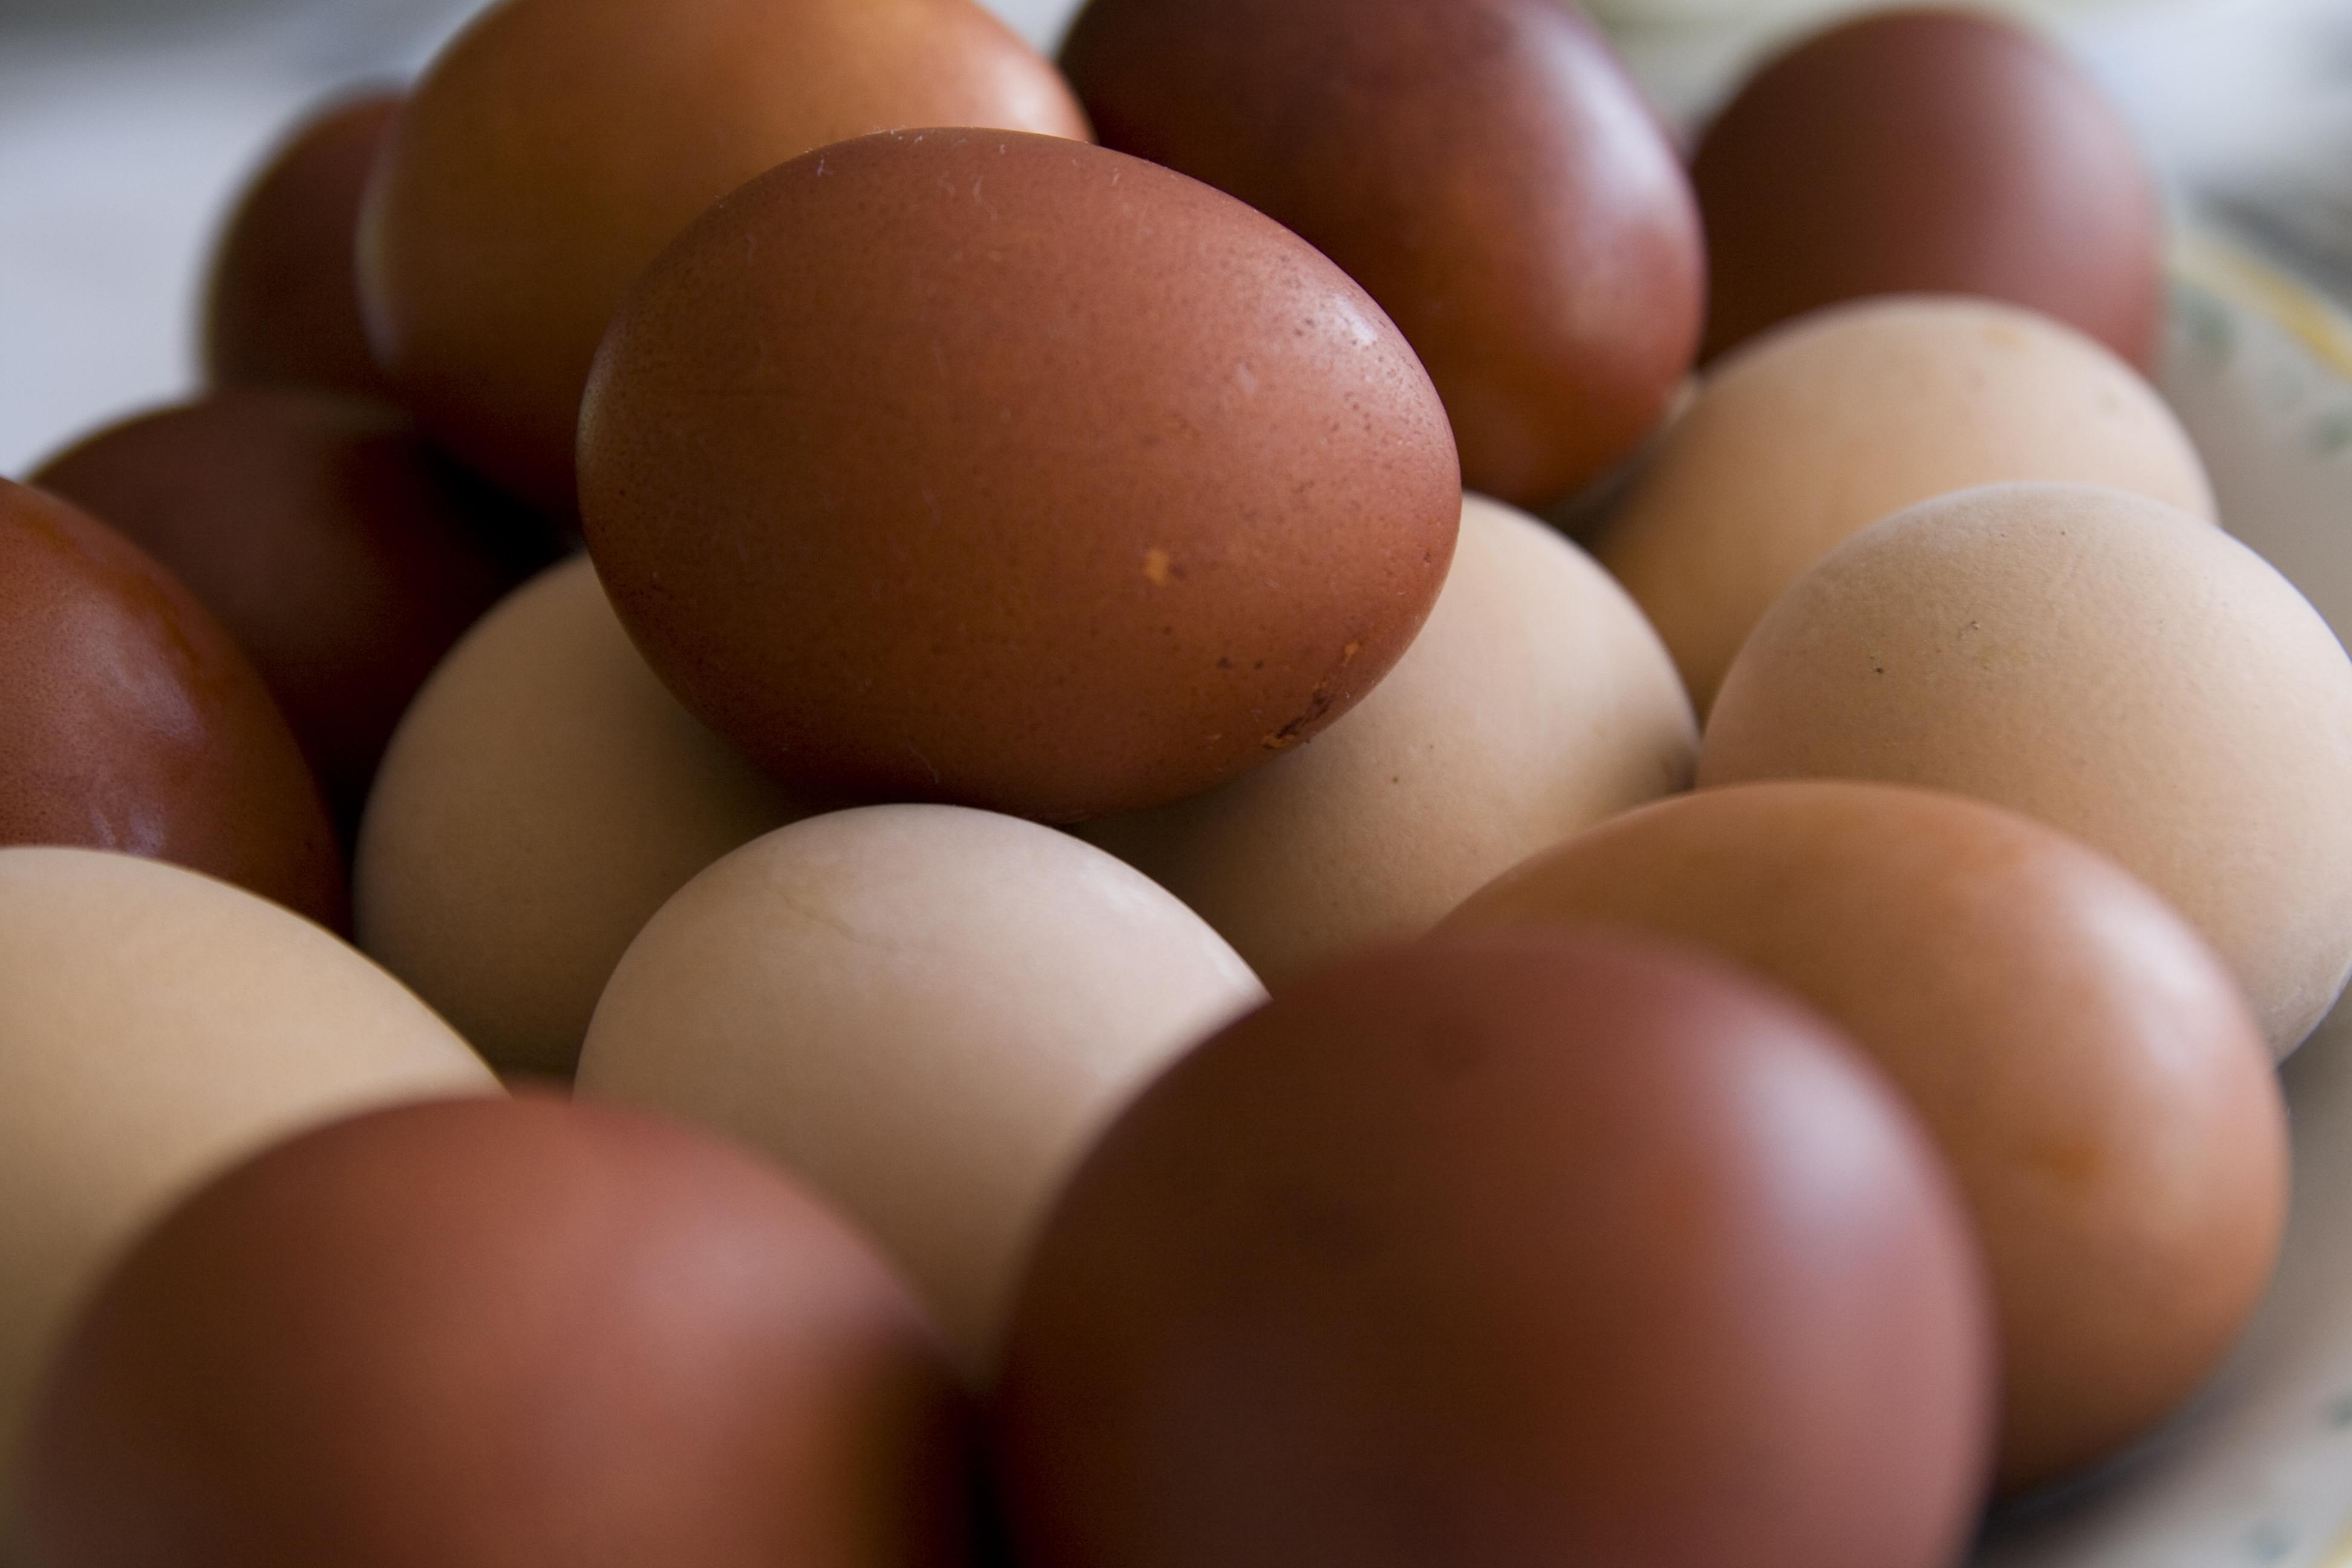 Eggs Are Healthier Than What Most People Think